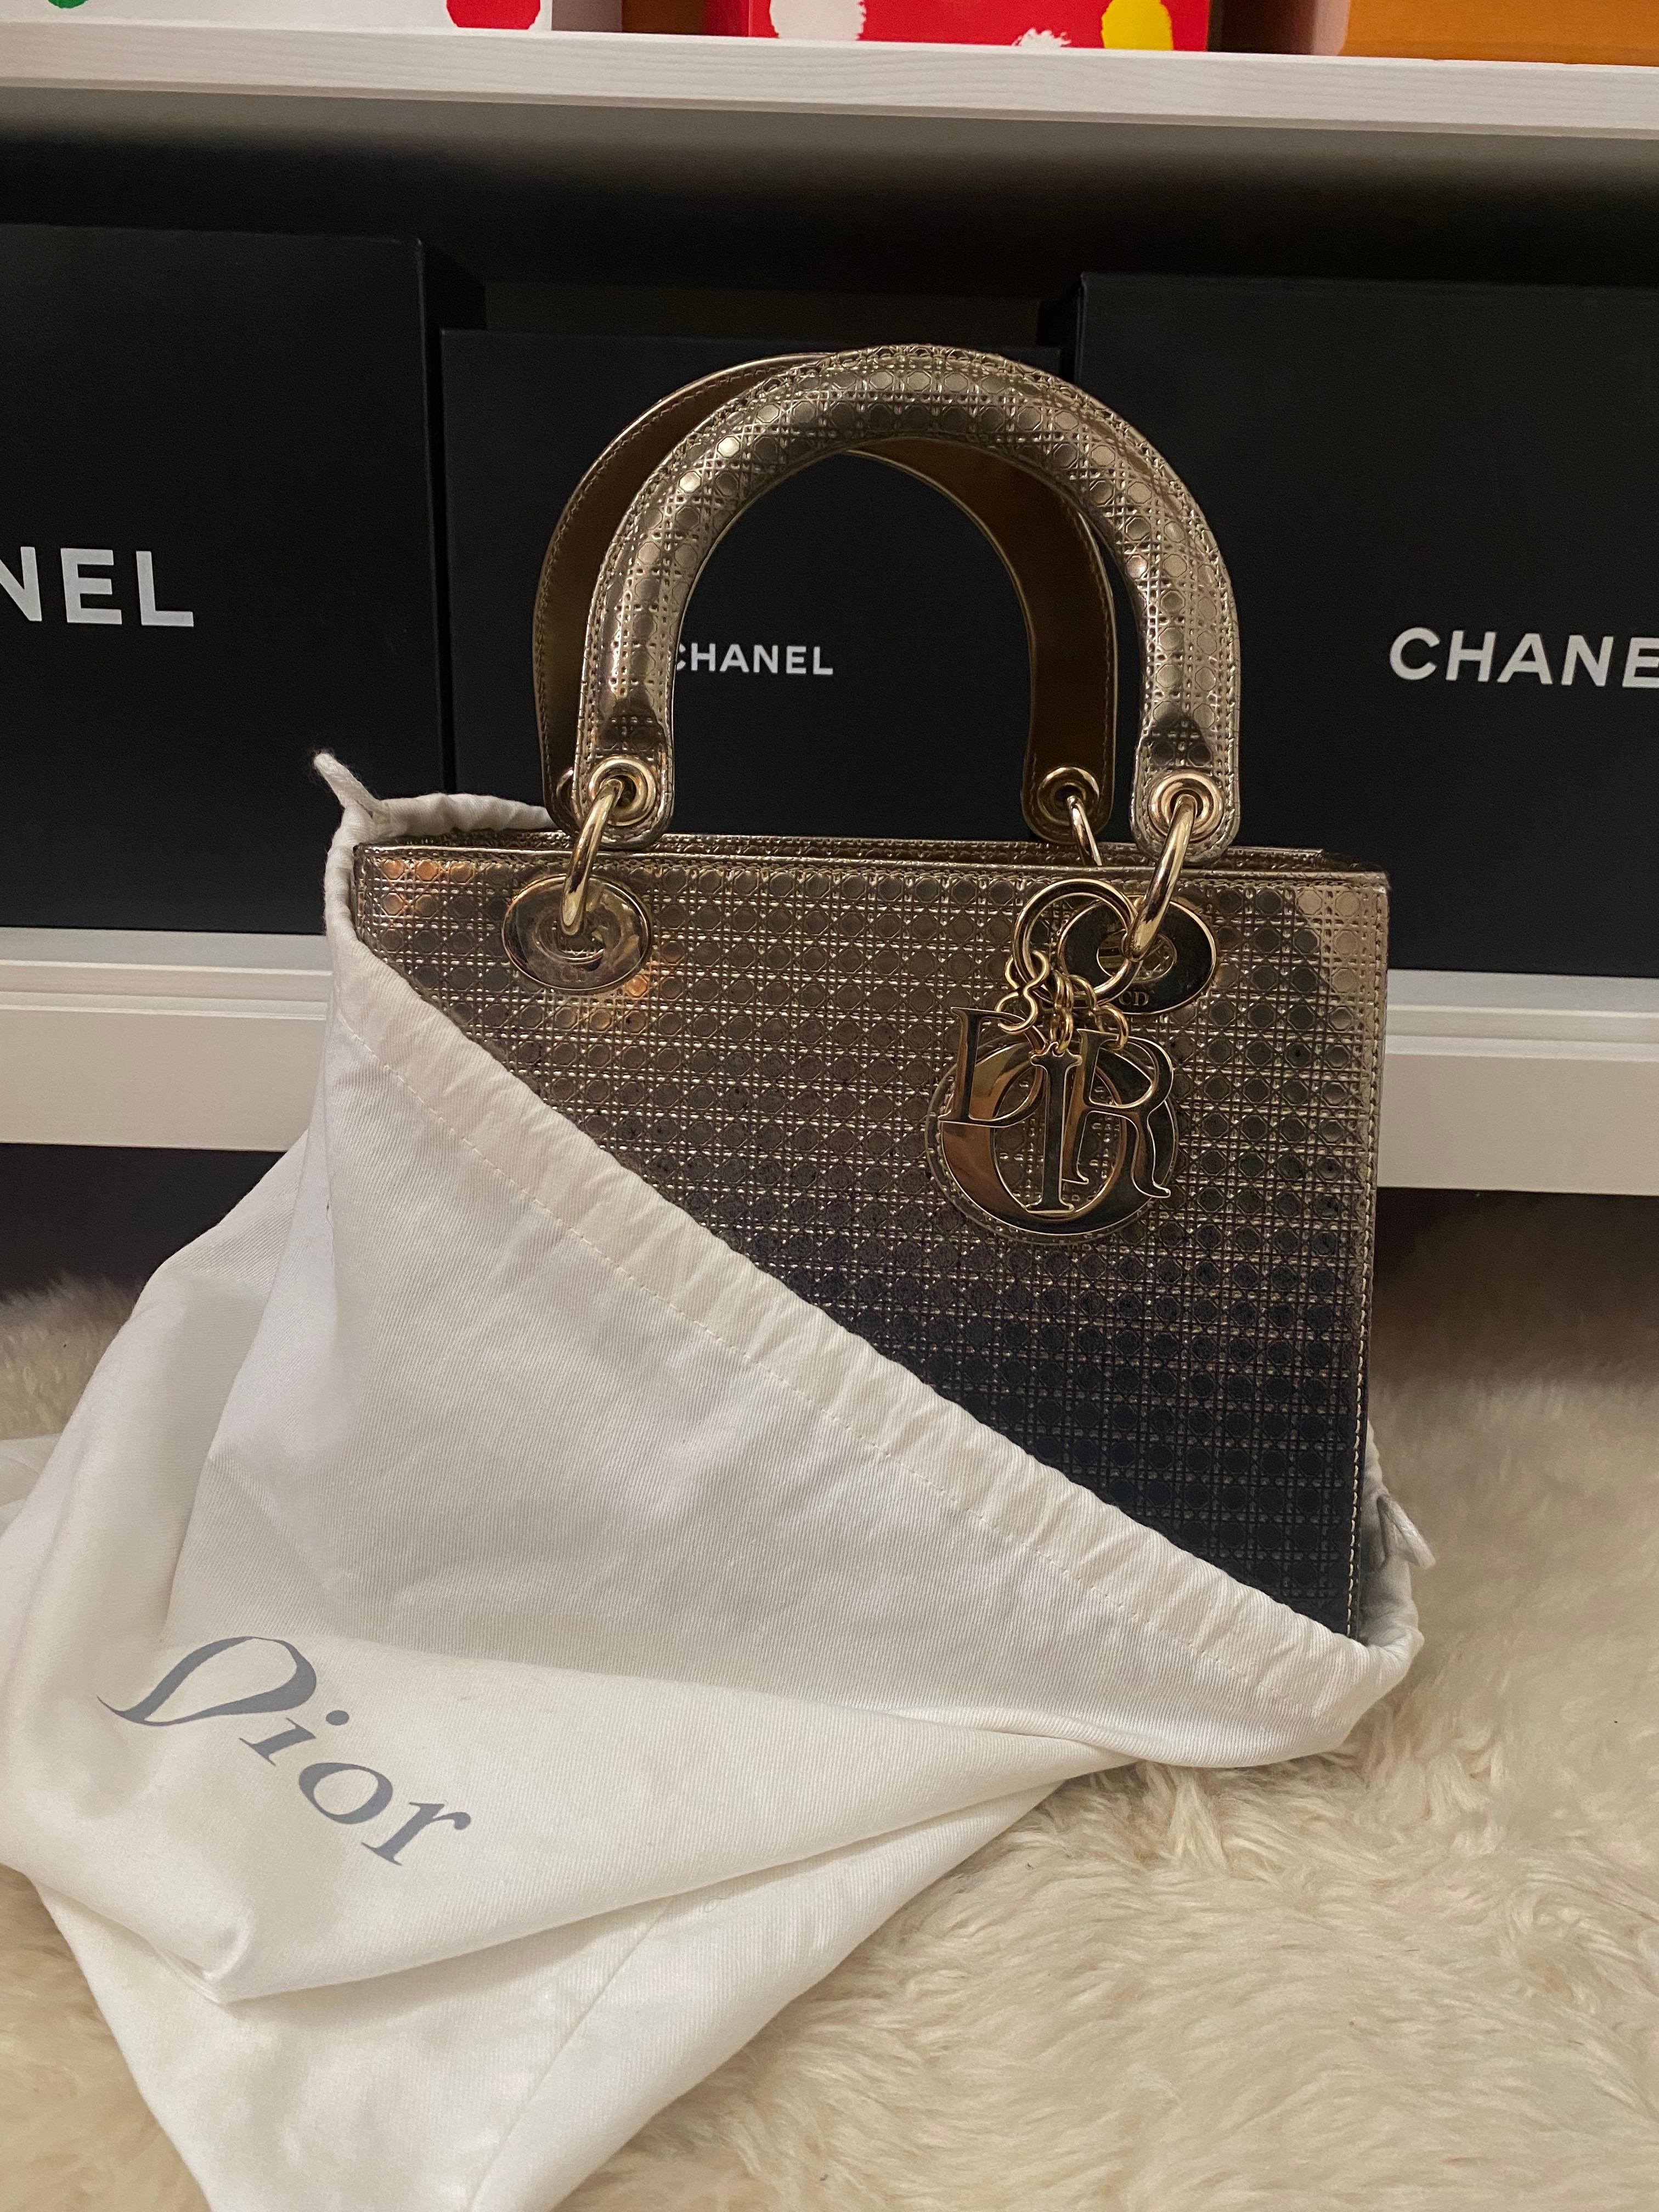 Dior Ombre Calfskin Lady Dior
Exterior Color: Blue, Silver, Multicolor
Interior Color: Blue
Exterior Material: Leather
Interior Material: Leather
Hardware Color: Silver
Accessories: Dust bag, Detachable Strap
SIZE AND FIT: 9